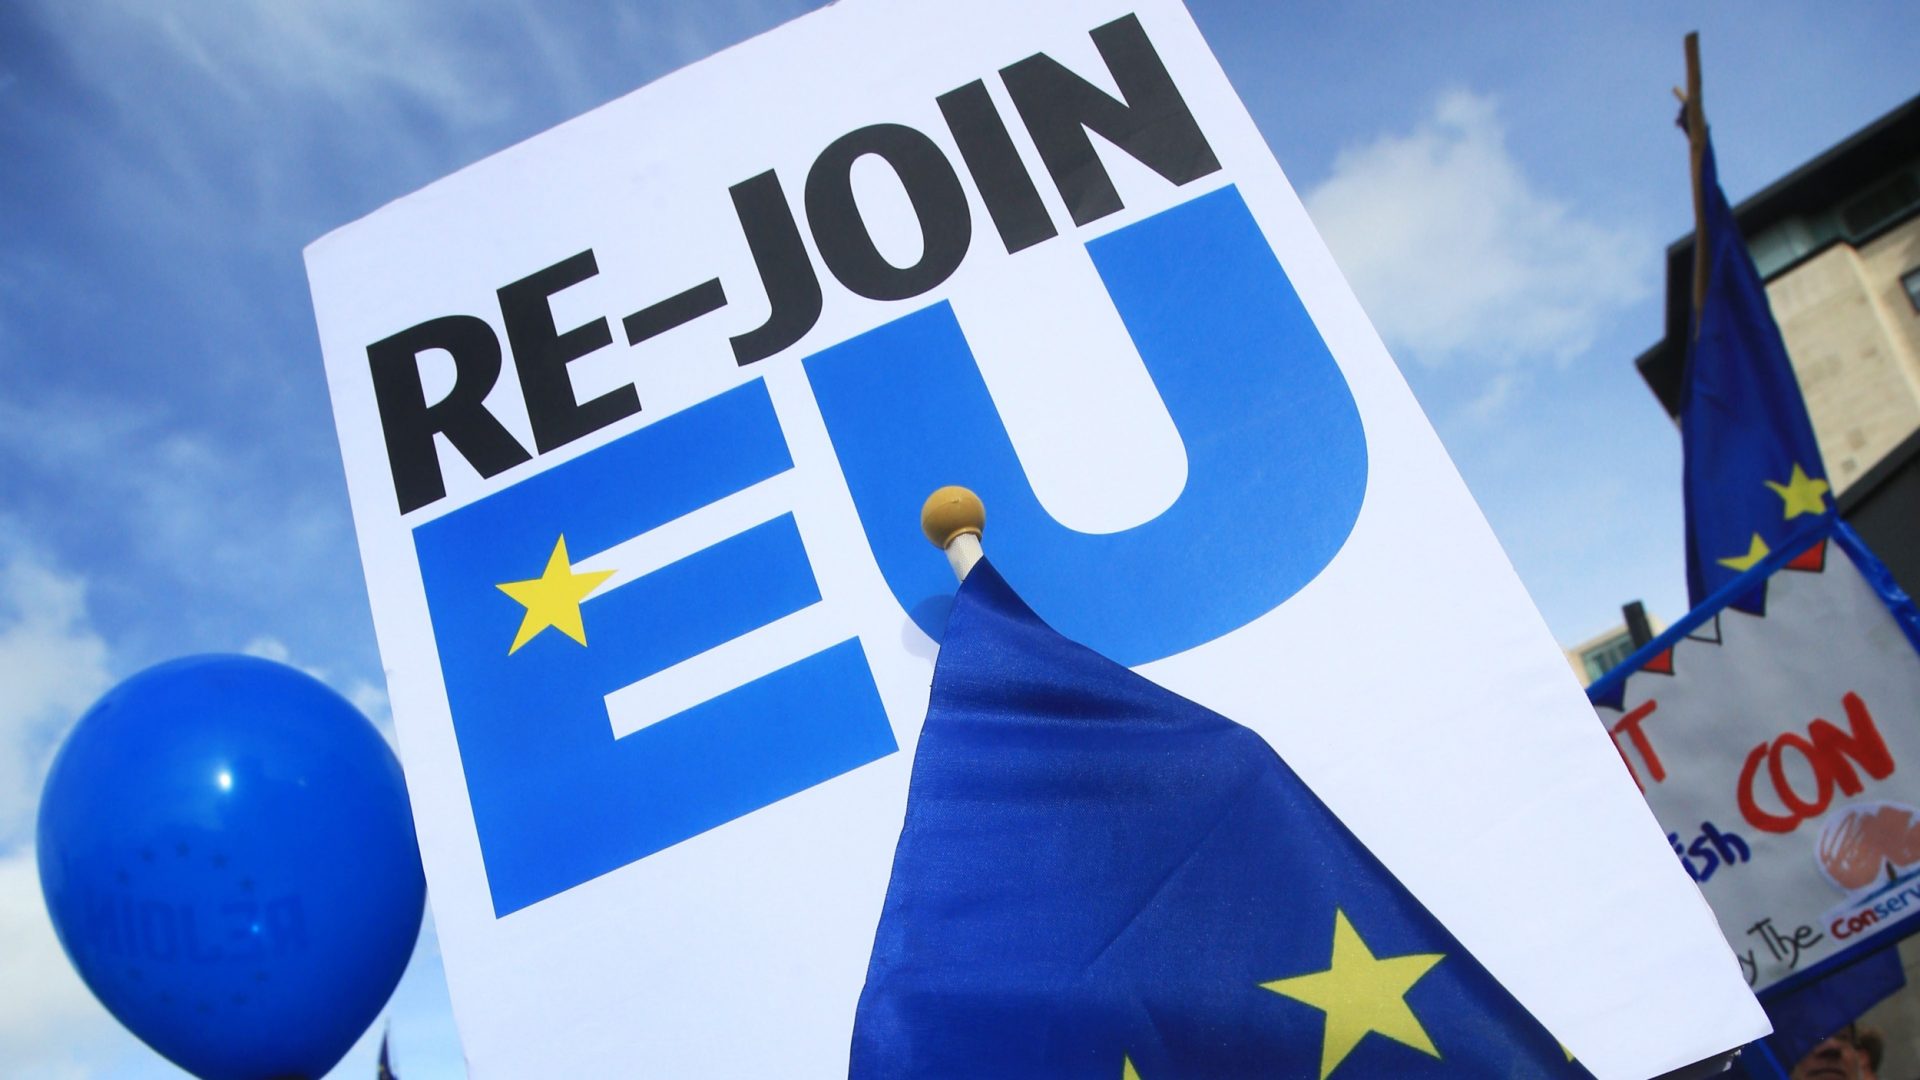 Recent polls show that the British public’s willingness to rejoin the EU is growing steadily. Photo: Martin Pope/Getty